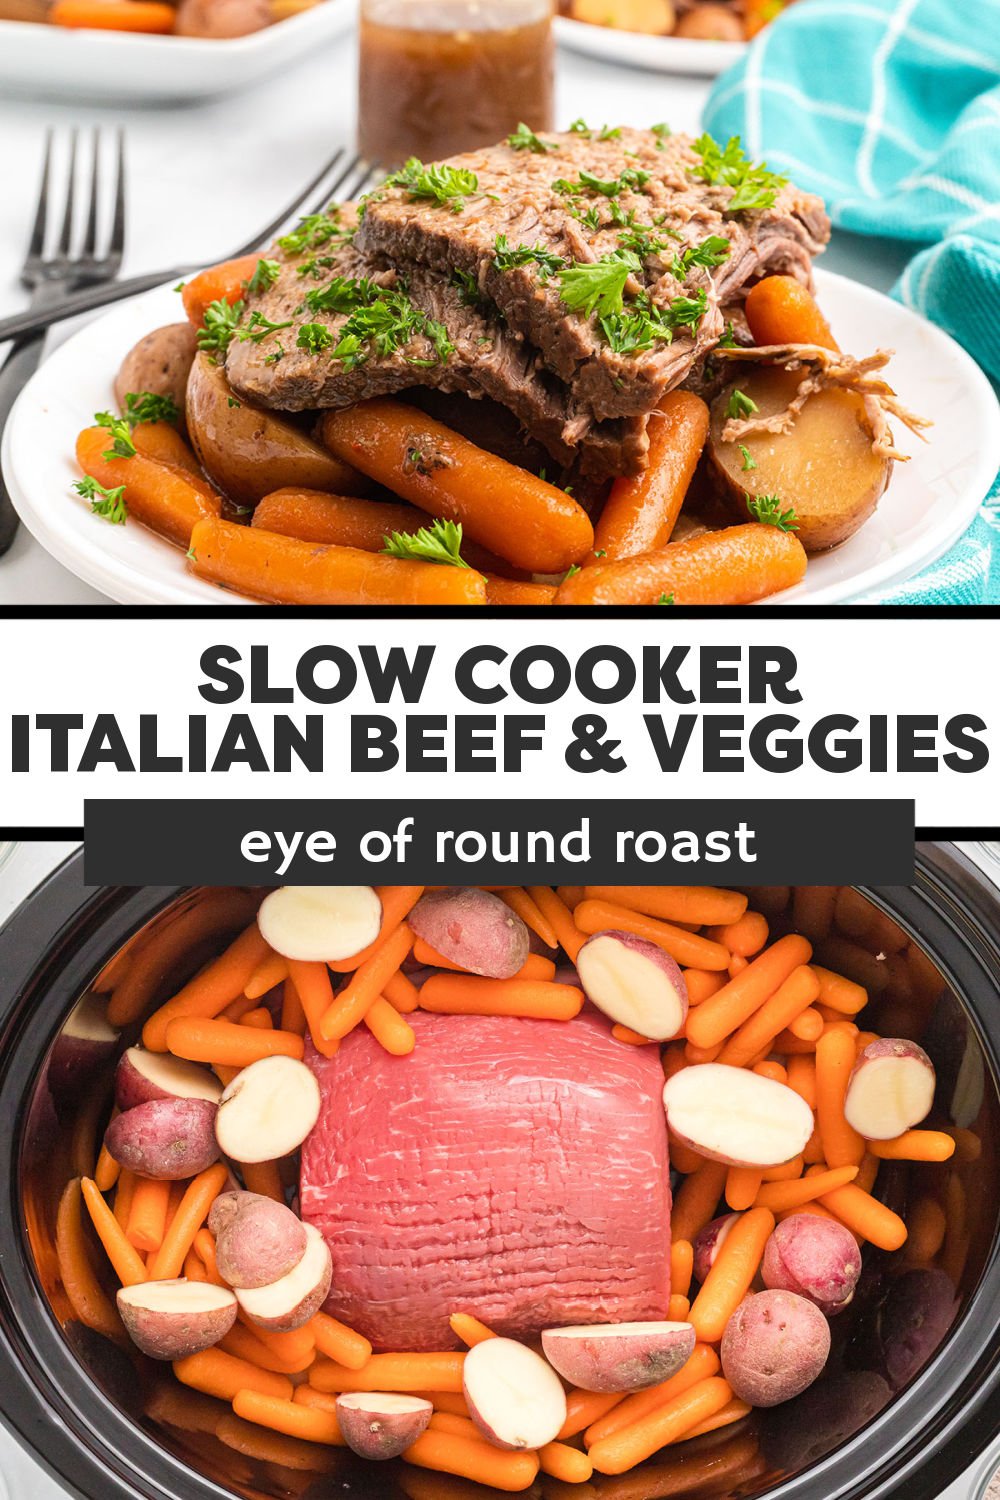 Slow cooker eye of round roast with vegetables is the perfect comfort food. Made easily in the crock pot, this tender roast is ideal for an easy weeknight dinner or Sunday dinner. | www.persnicketyplates.com